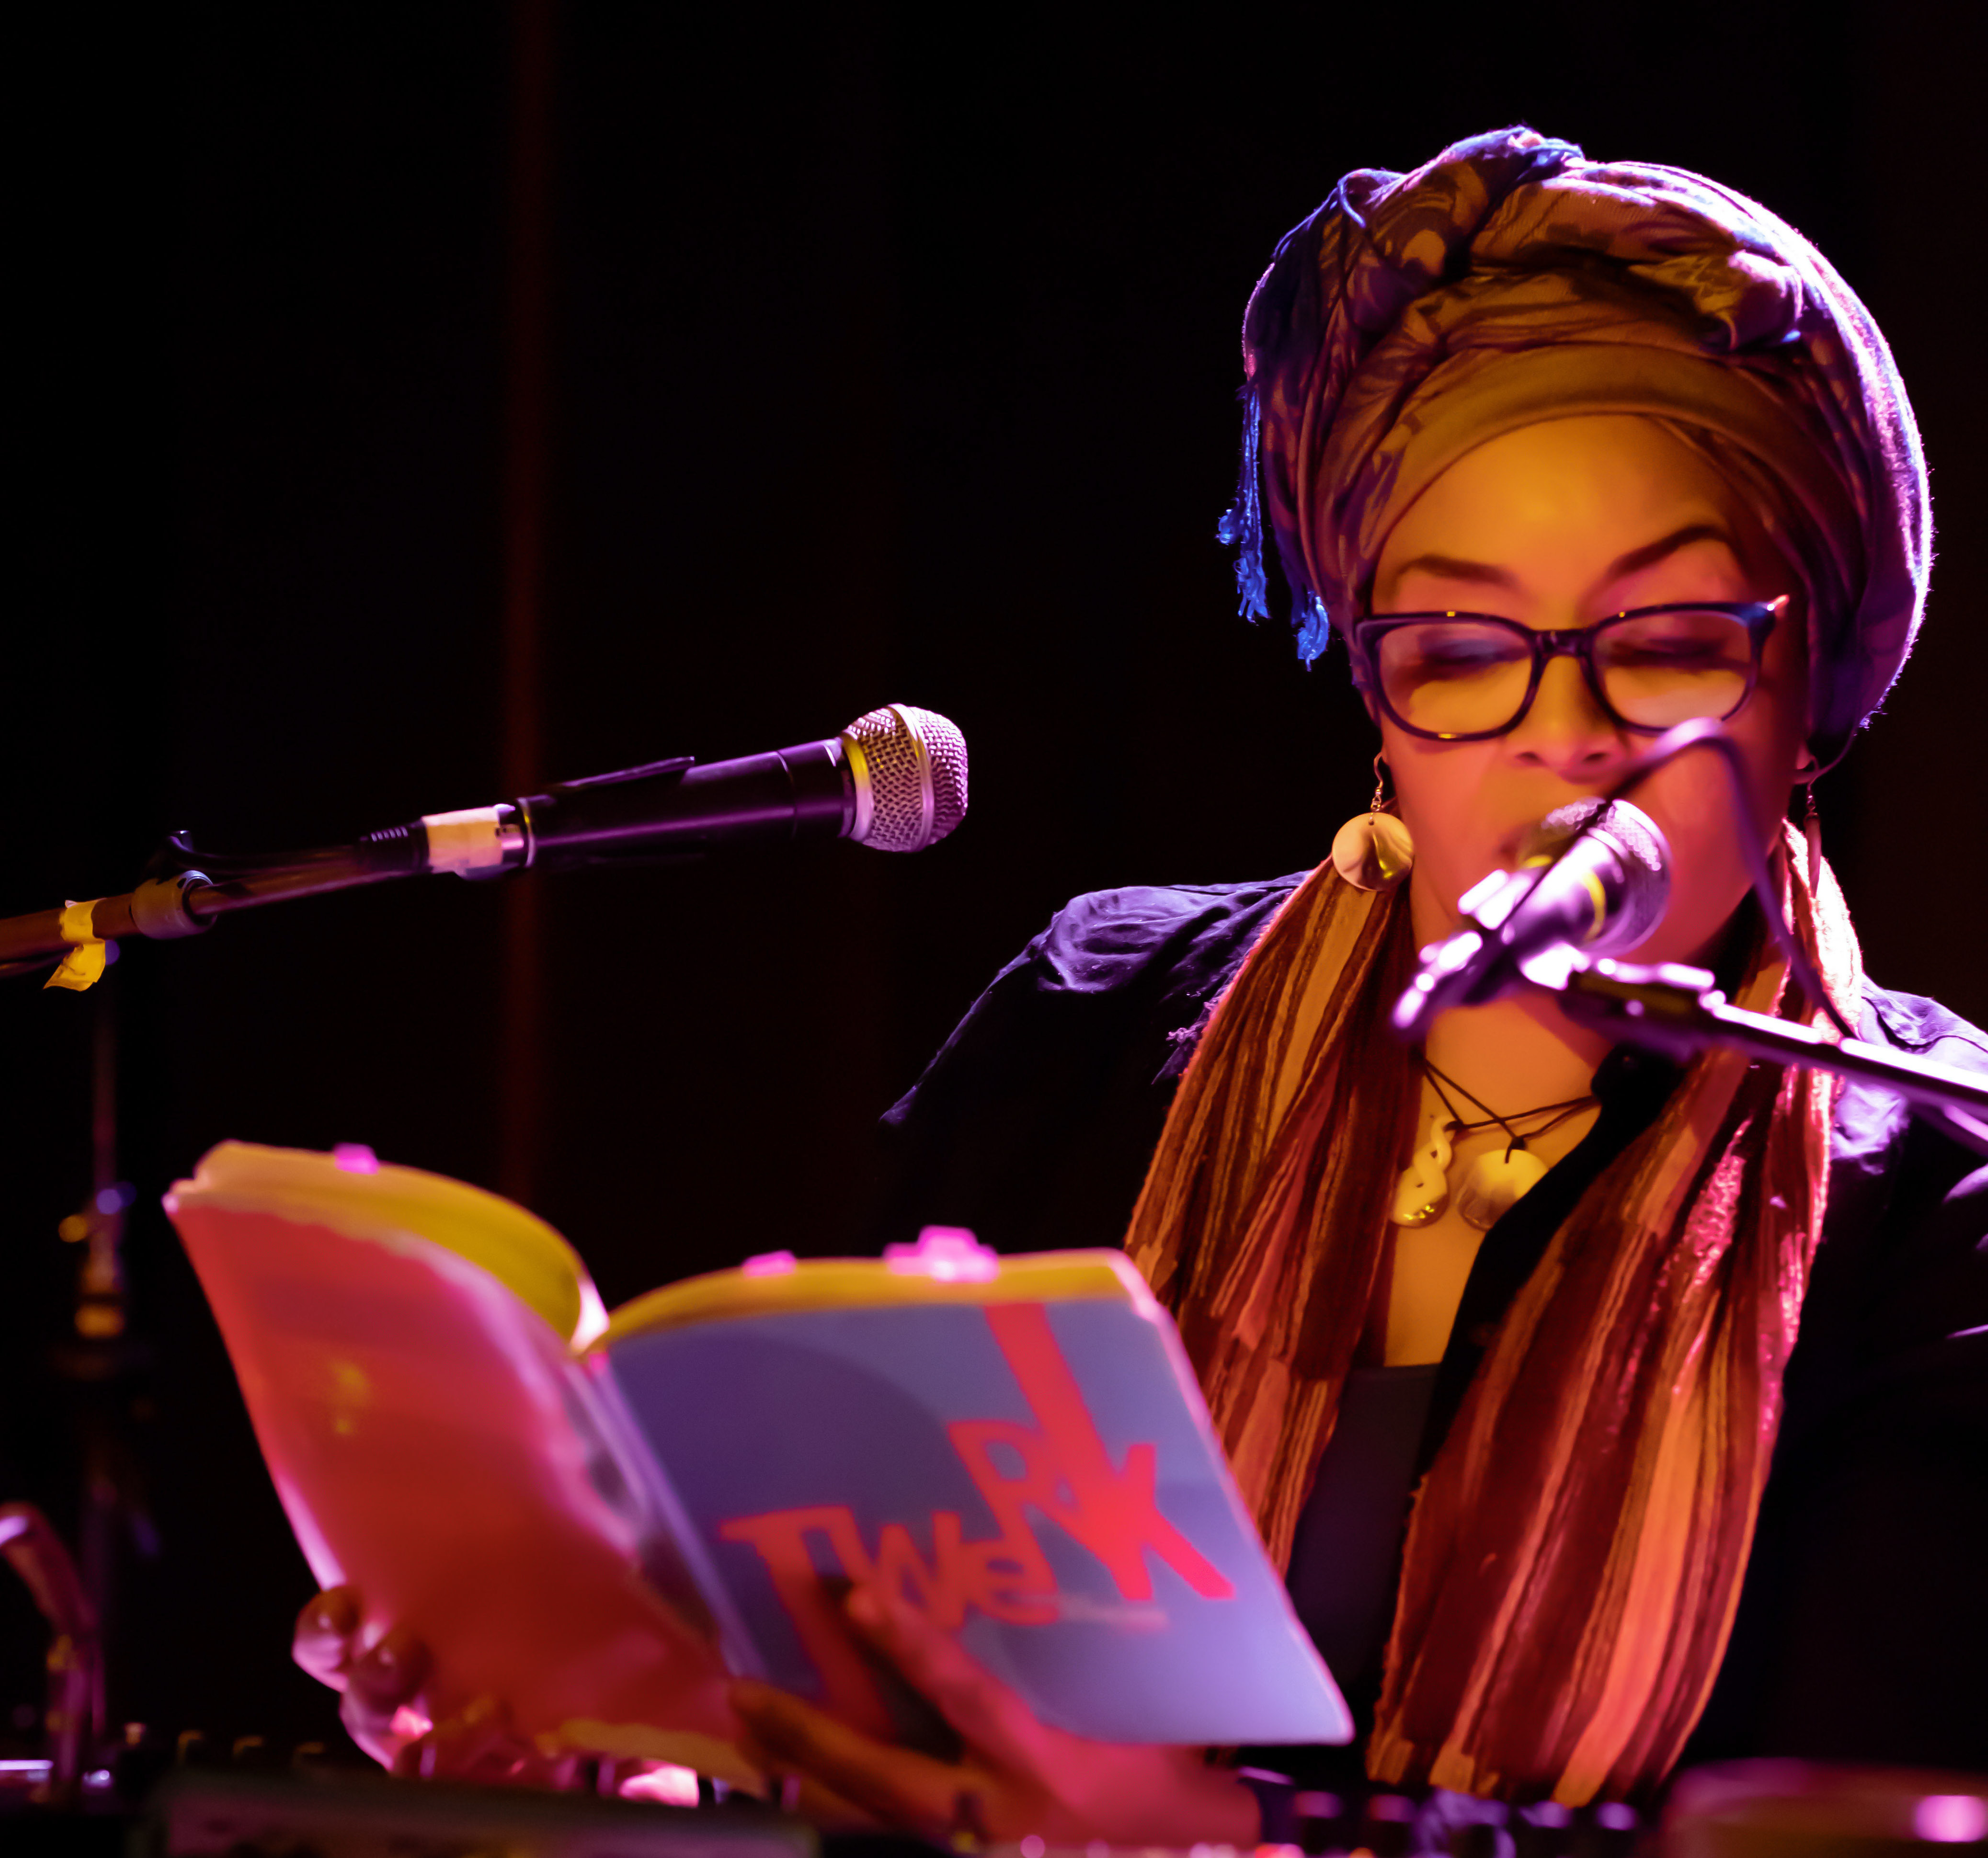 A woman reads from a book on a stage with two microphones.